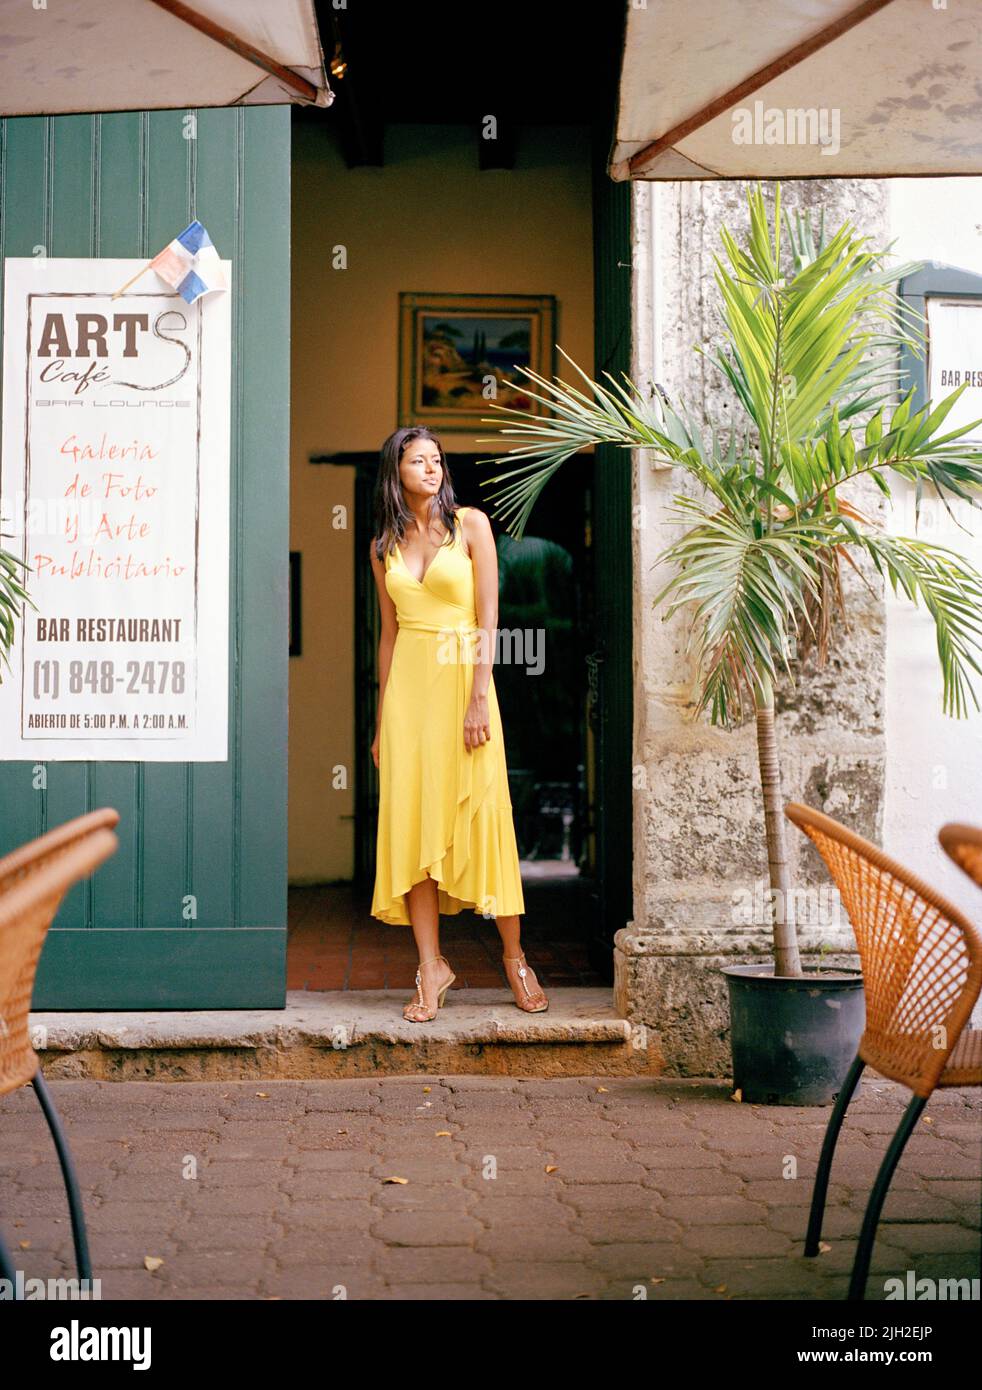 A woman wearing a Diane von Furstenberg dress stands in the doorway to a café in Santo Domingo, Dominican Republic. Stock Photo